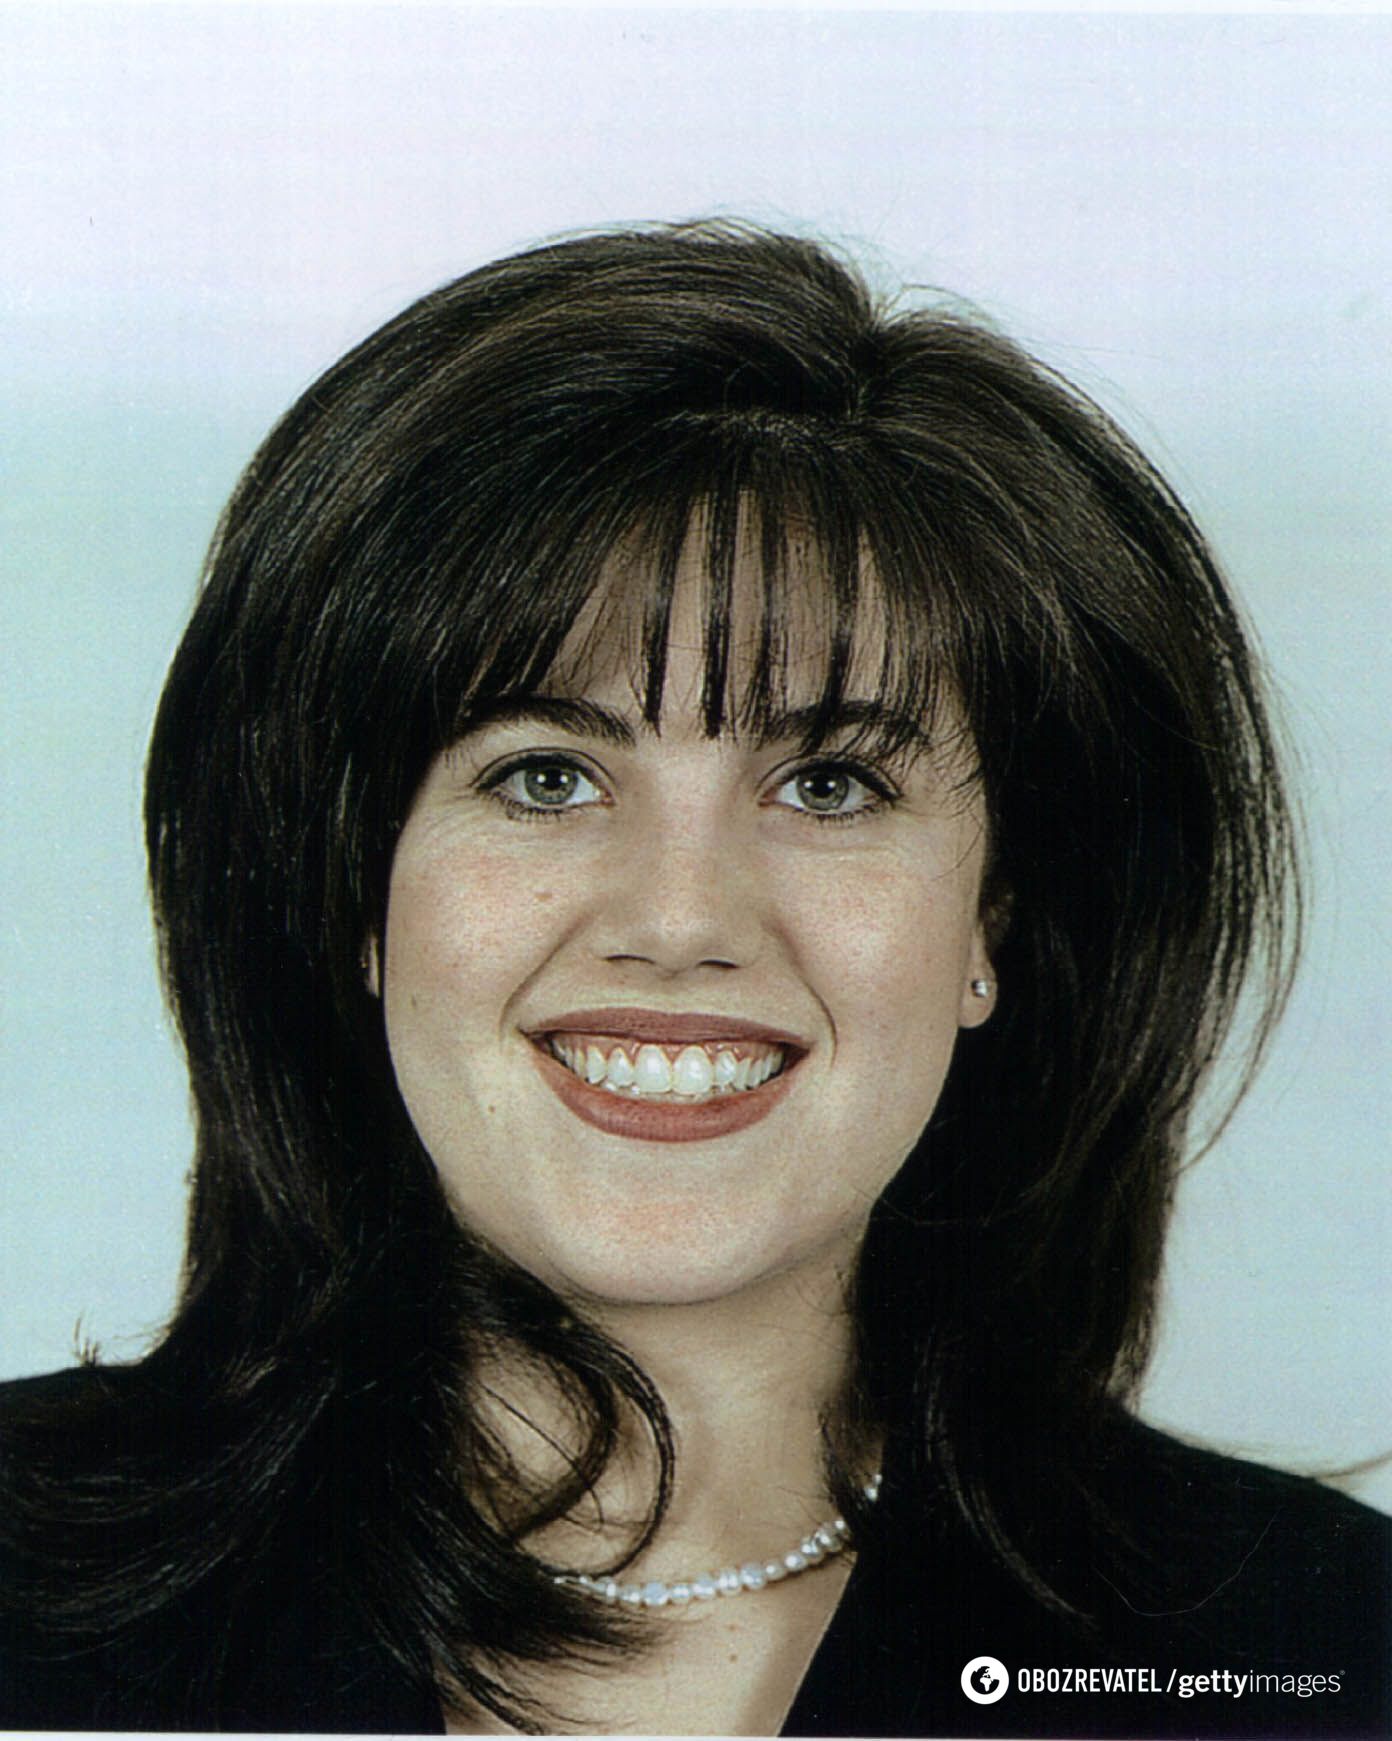 How the life of Monica Lewinsky, the figurehead of the most high-profile sex scandal in the United States, has turned out and what she looks like now. Photo